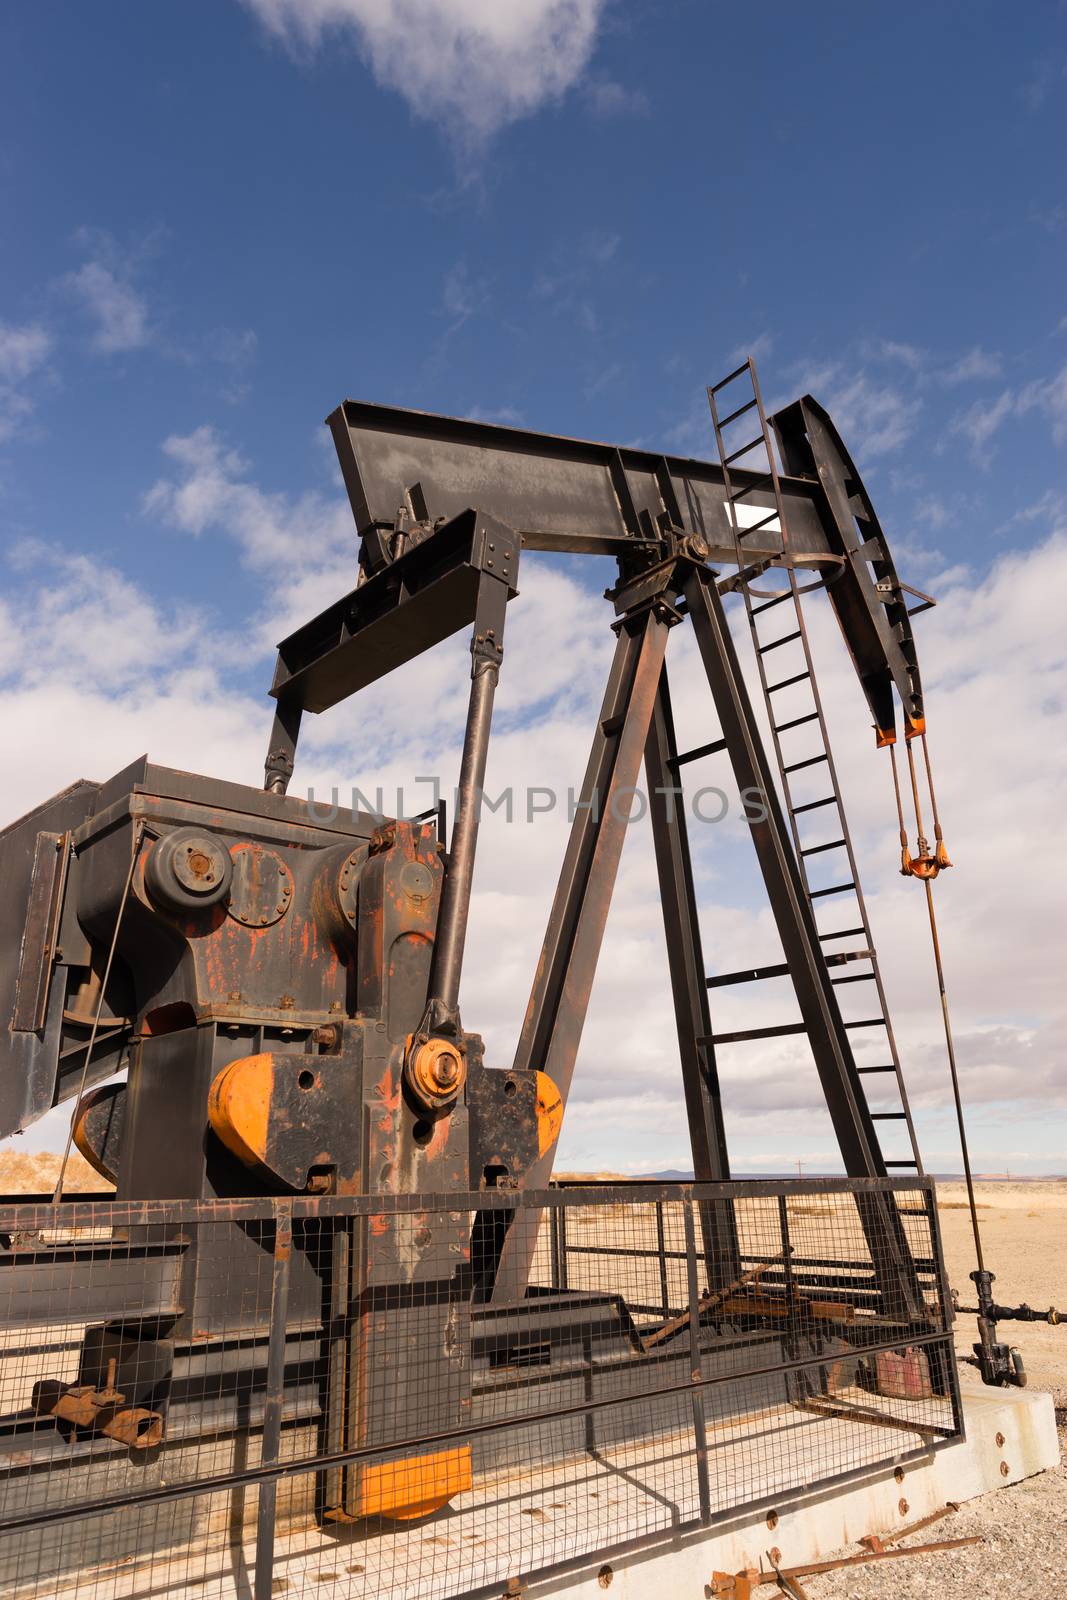 Wyoming Industrial Oil Pump Jack Fracking Crude Extraction Machi by ChrisBoswell